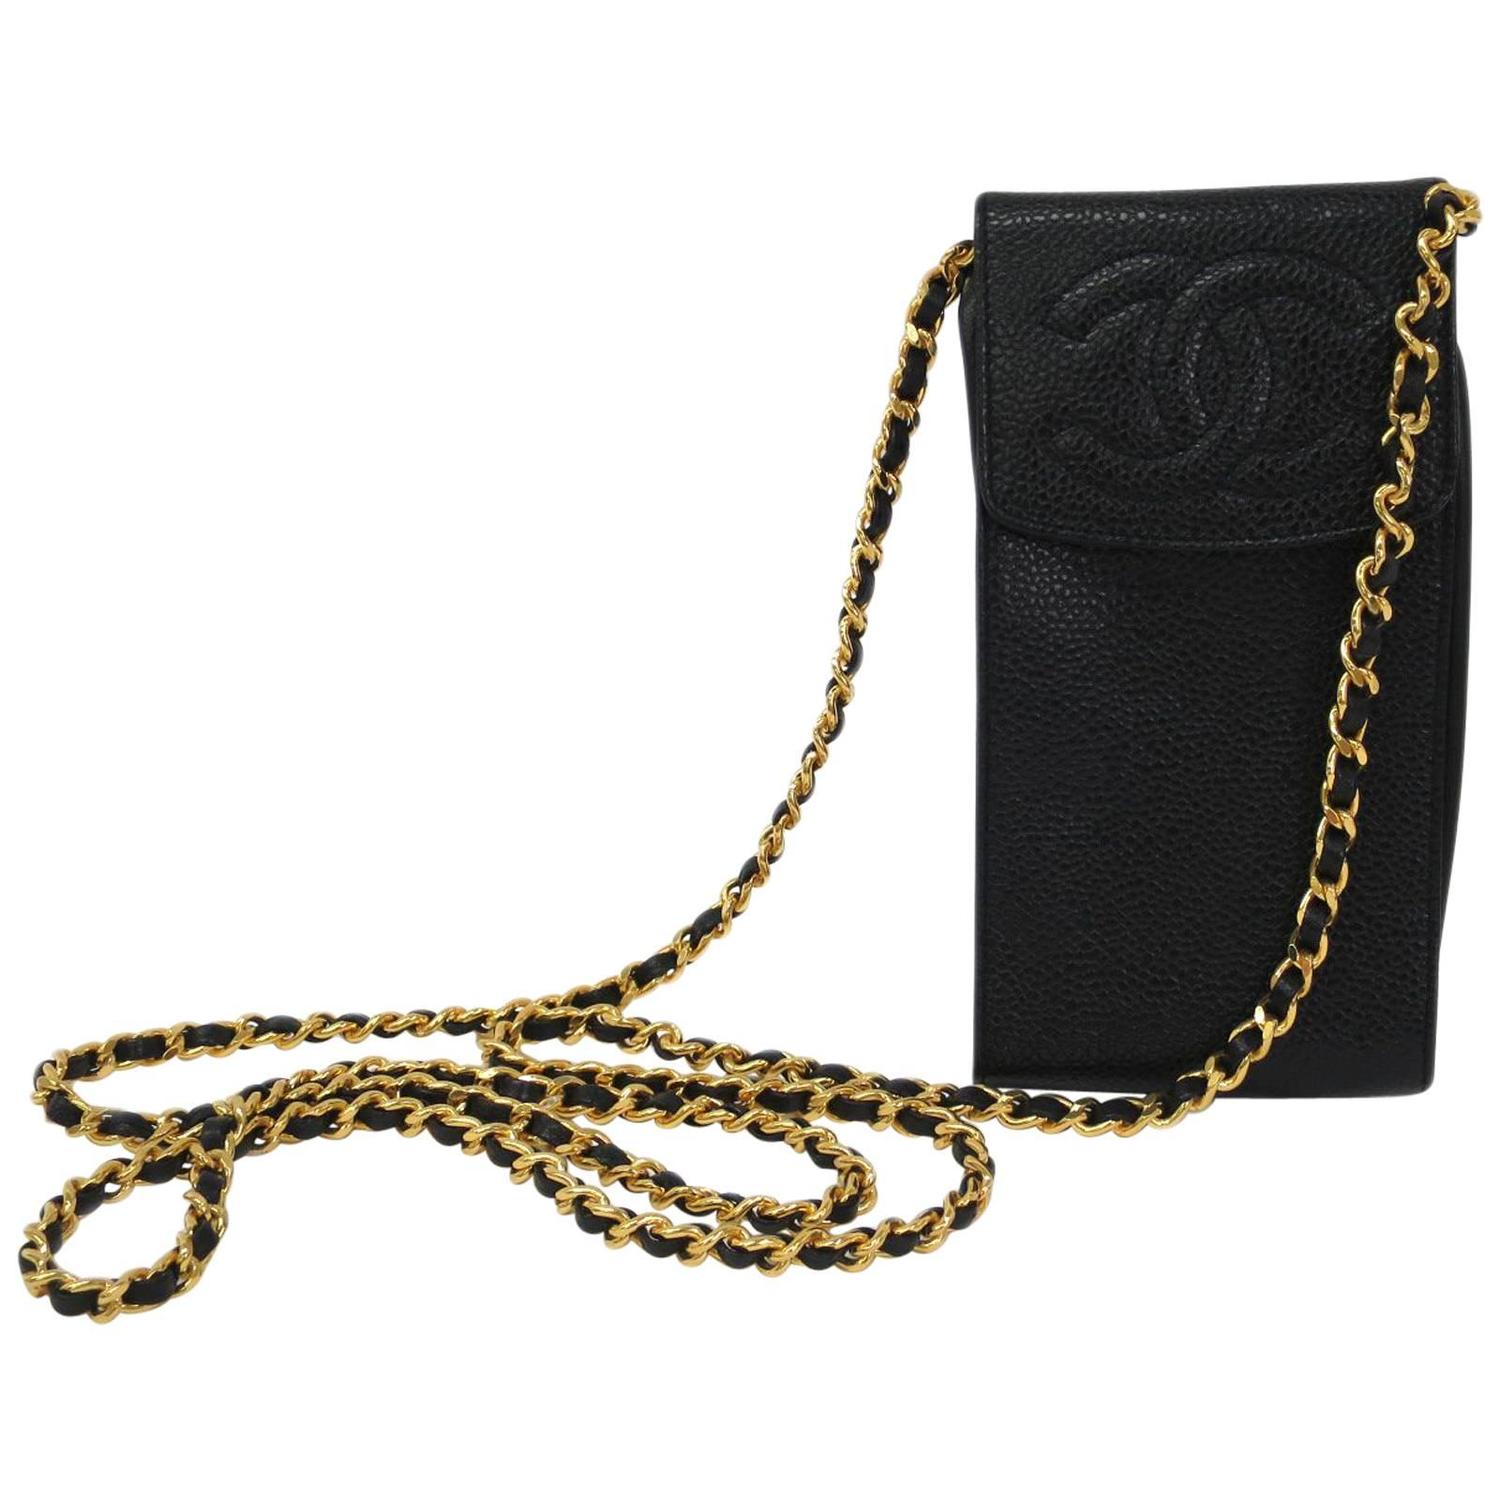 Chanel Black Caviar Leather Gold Mini Cell Phone Crossbody Shoulder Bag in Box For Sale at 1stdibs